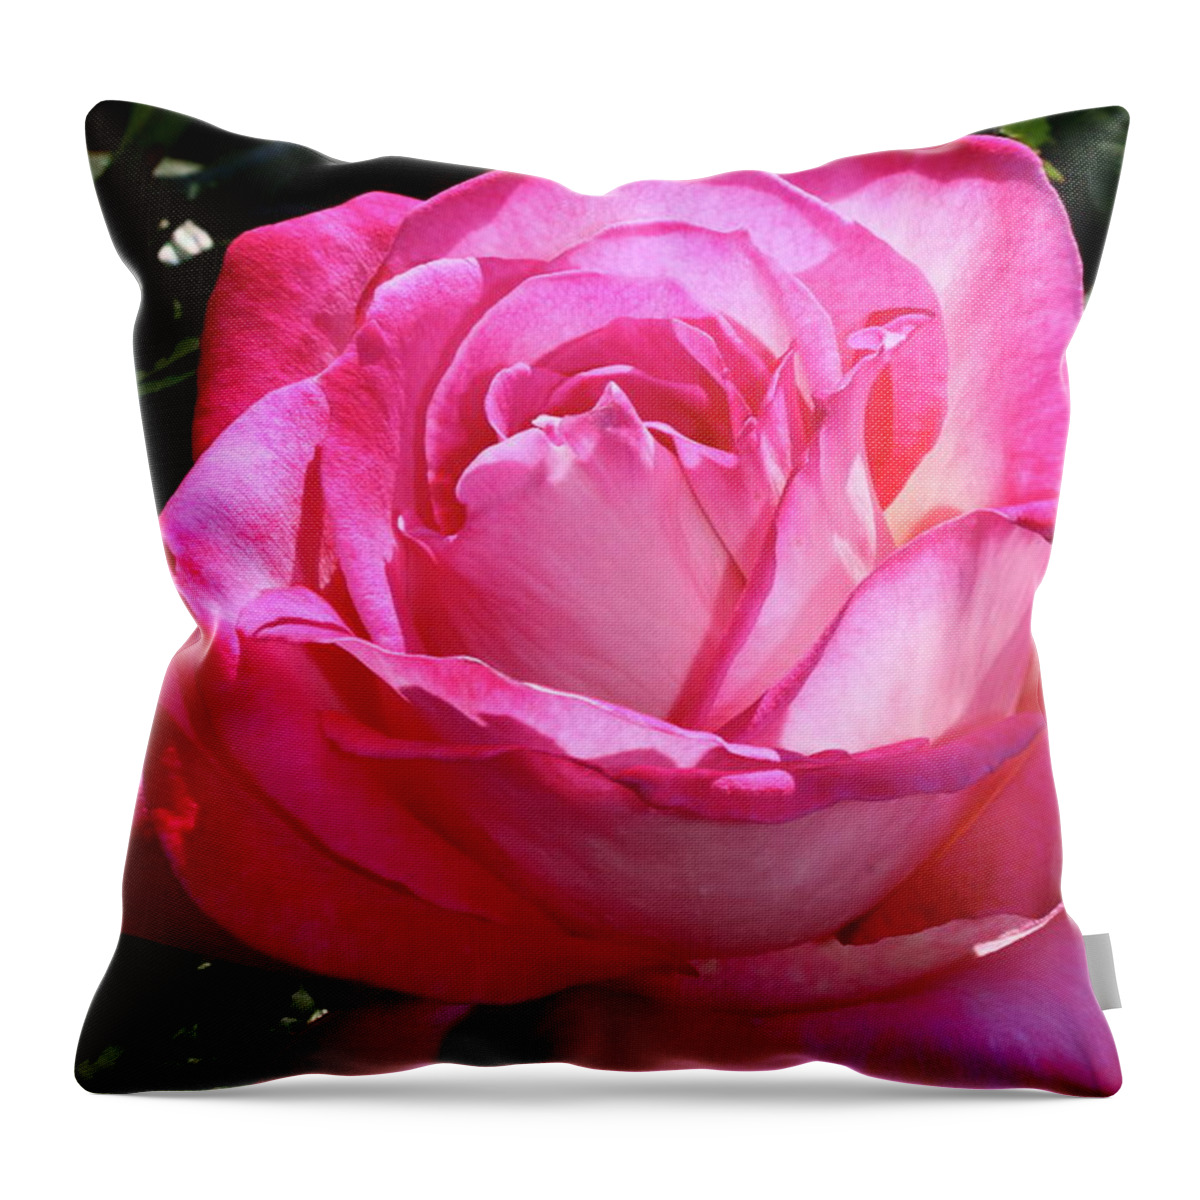 Flower Throw Pillow featuring the photograph Shades Of Pink by Christiane Schulze Art And Photography